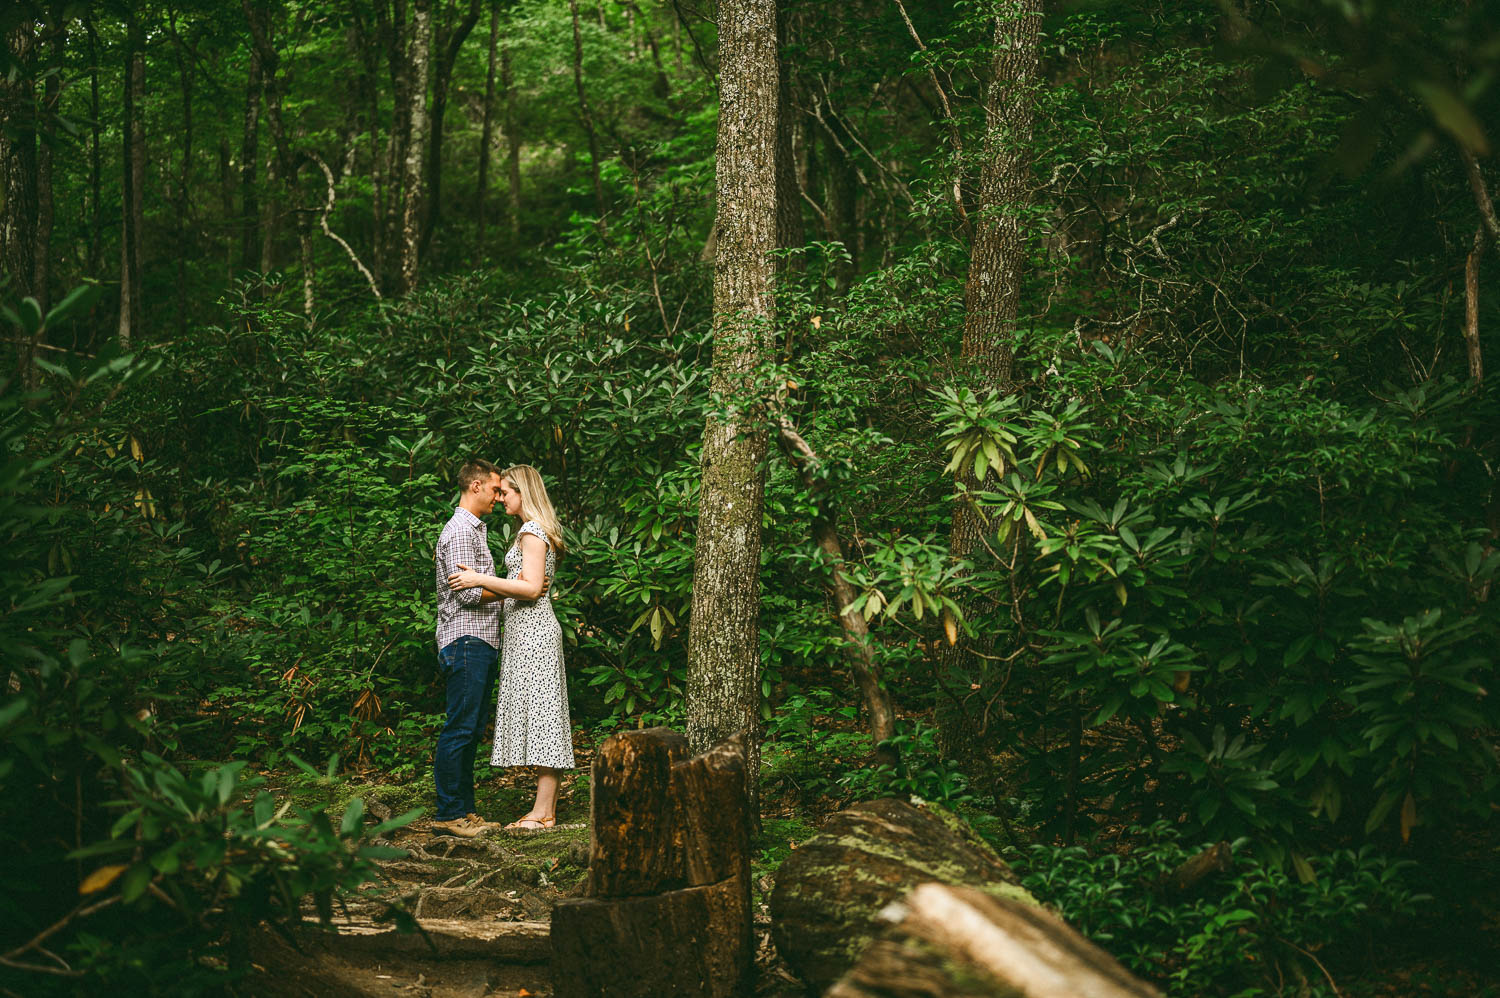 Pretty engagement session location